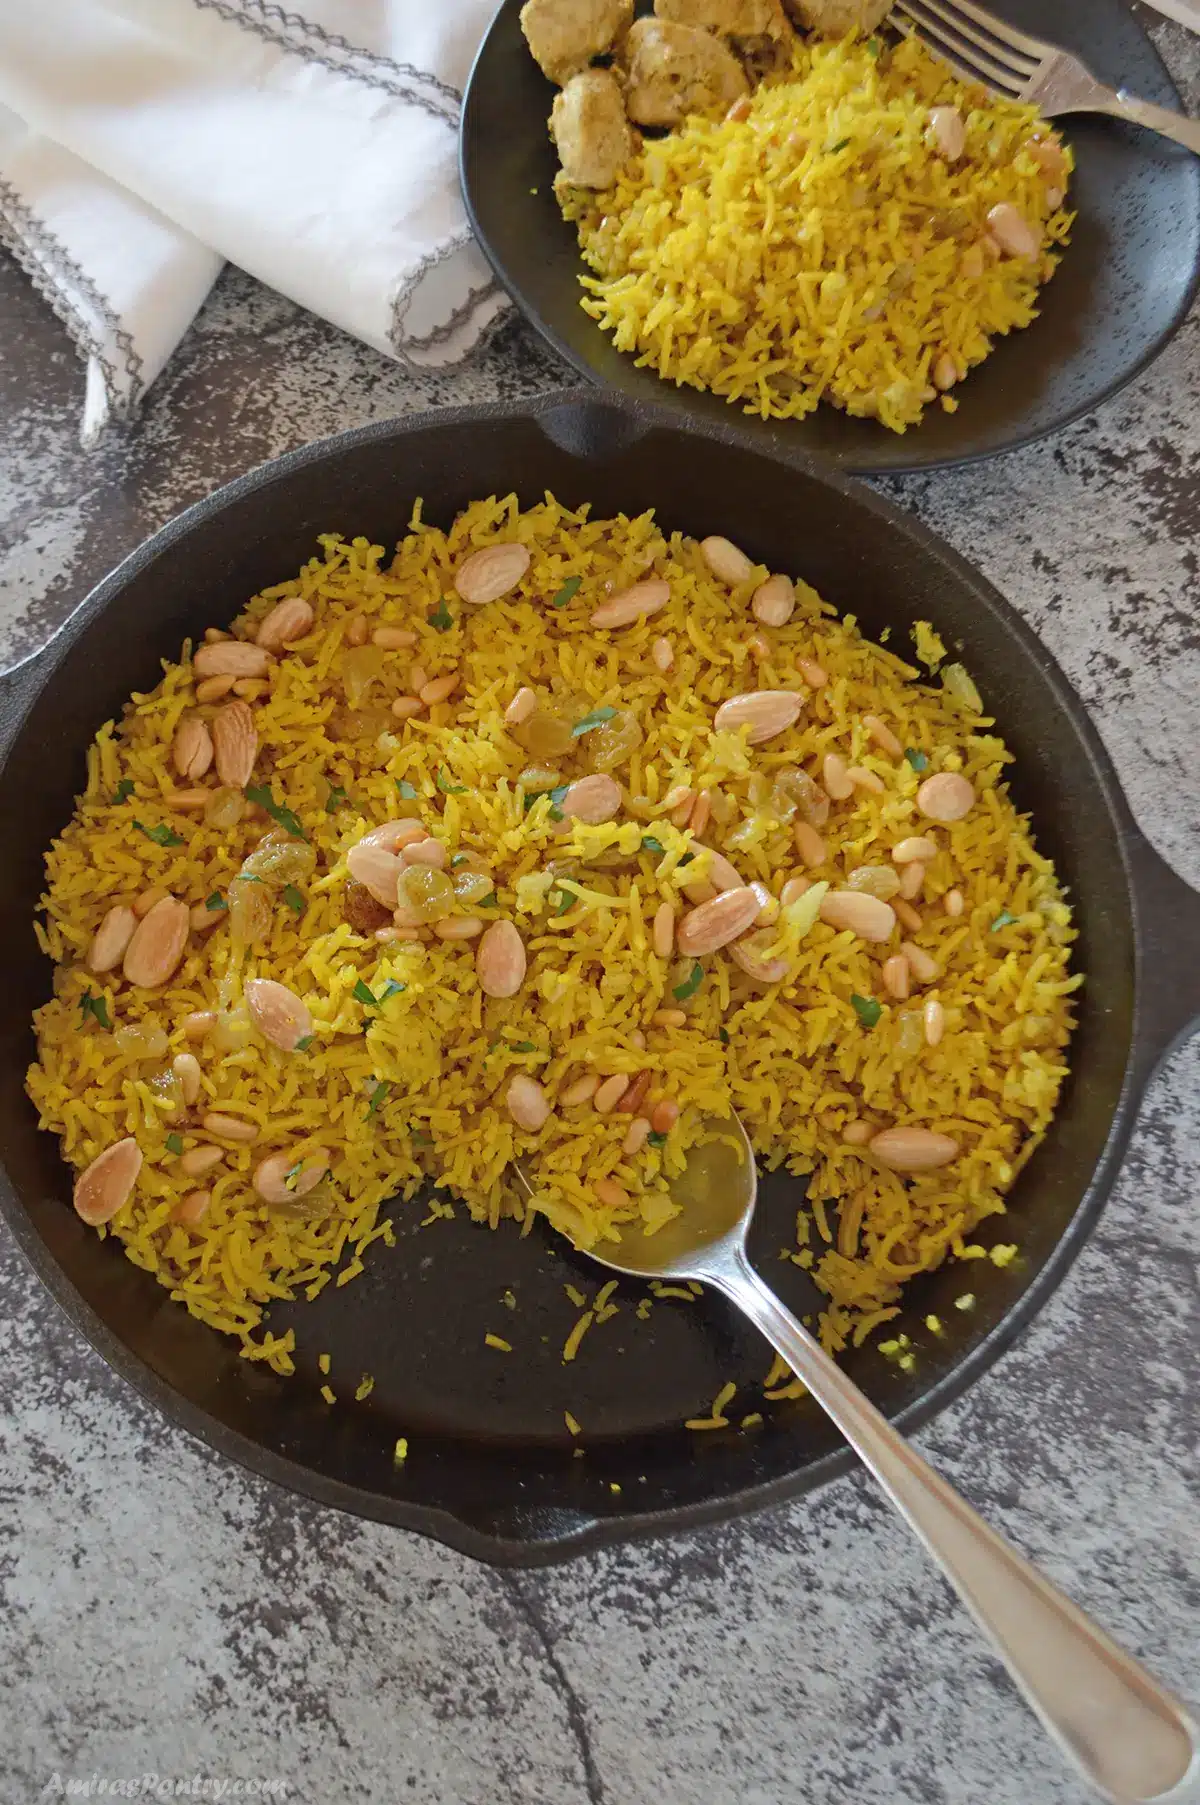 An overhead view of a skillet with yellow rice and a serving plate on the side.